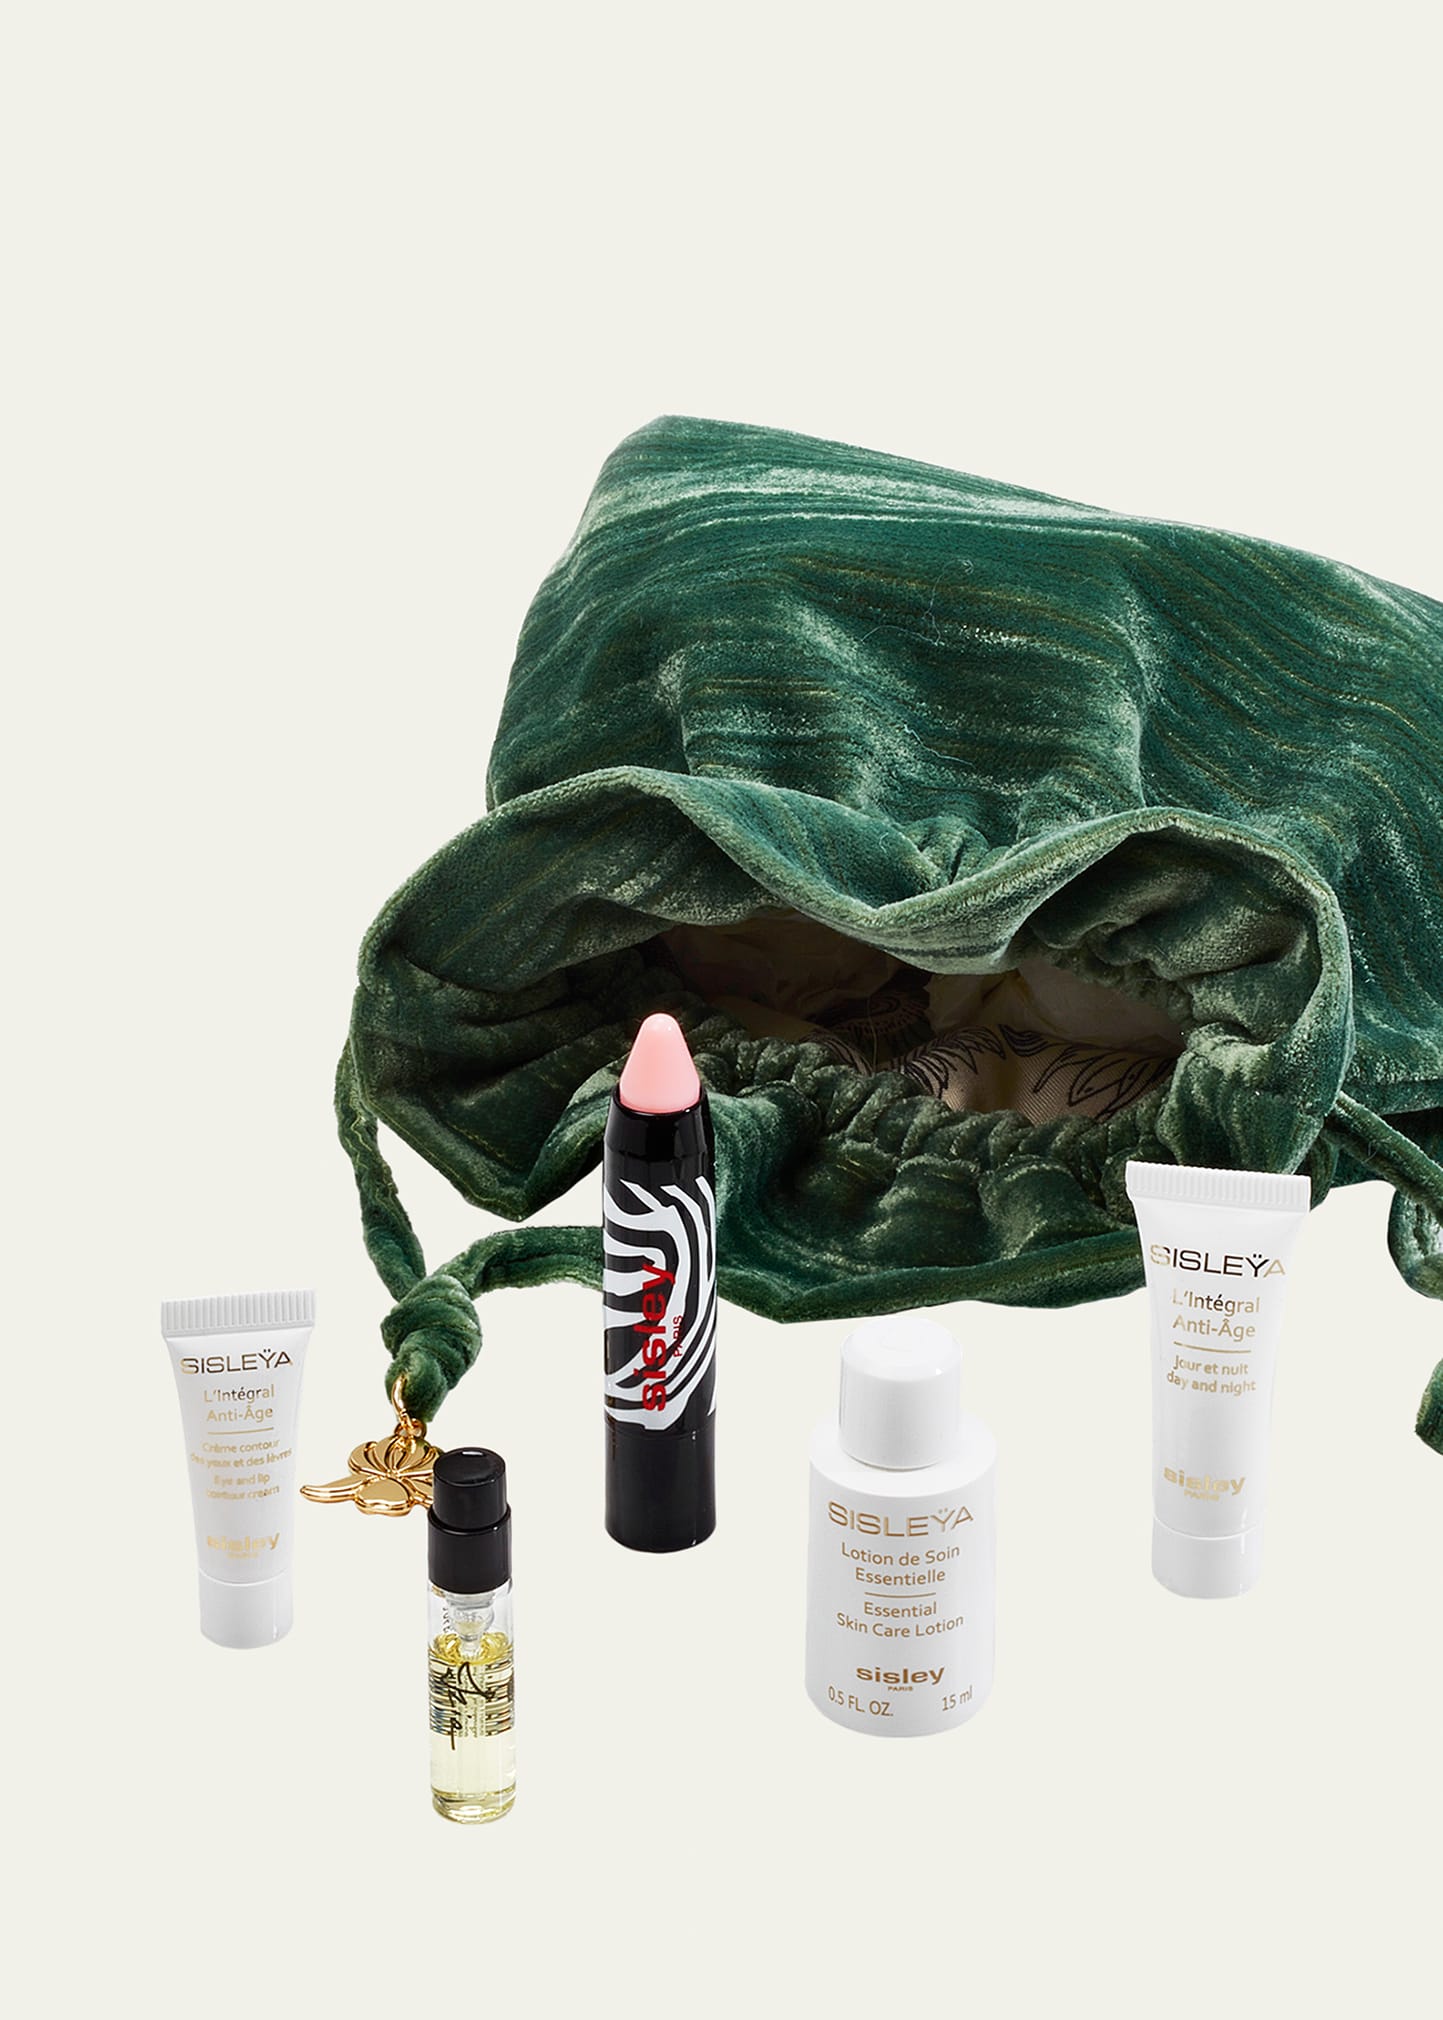 Green Purse Pouch Beauty Set, Yours with any $350 Sisley-Paris Order